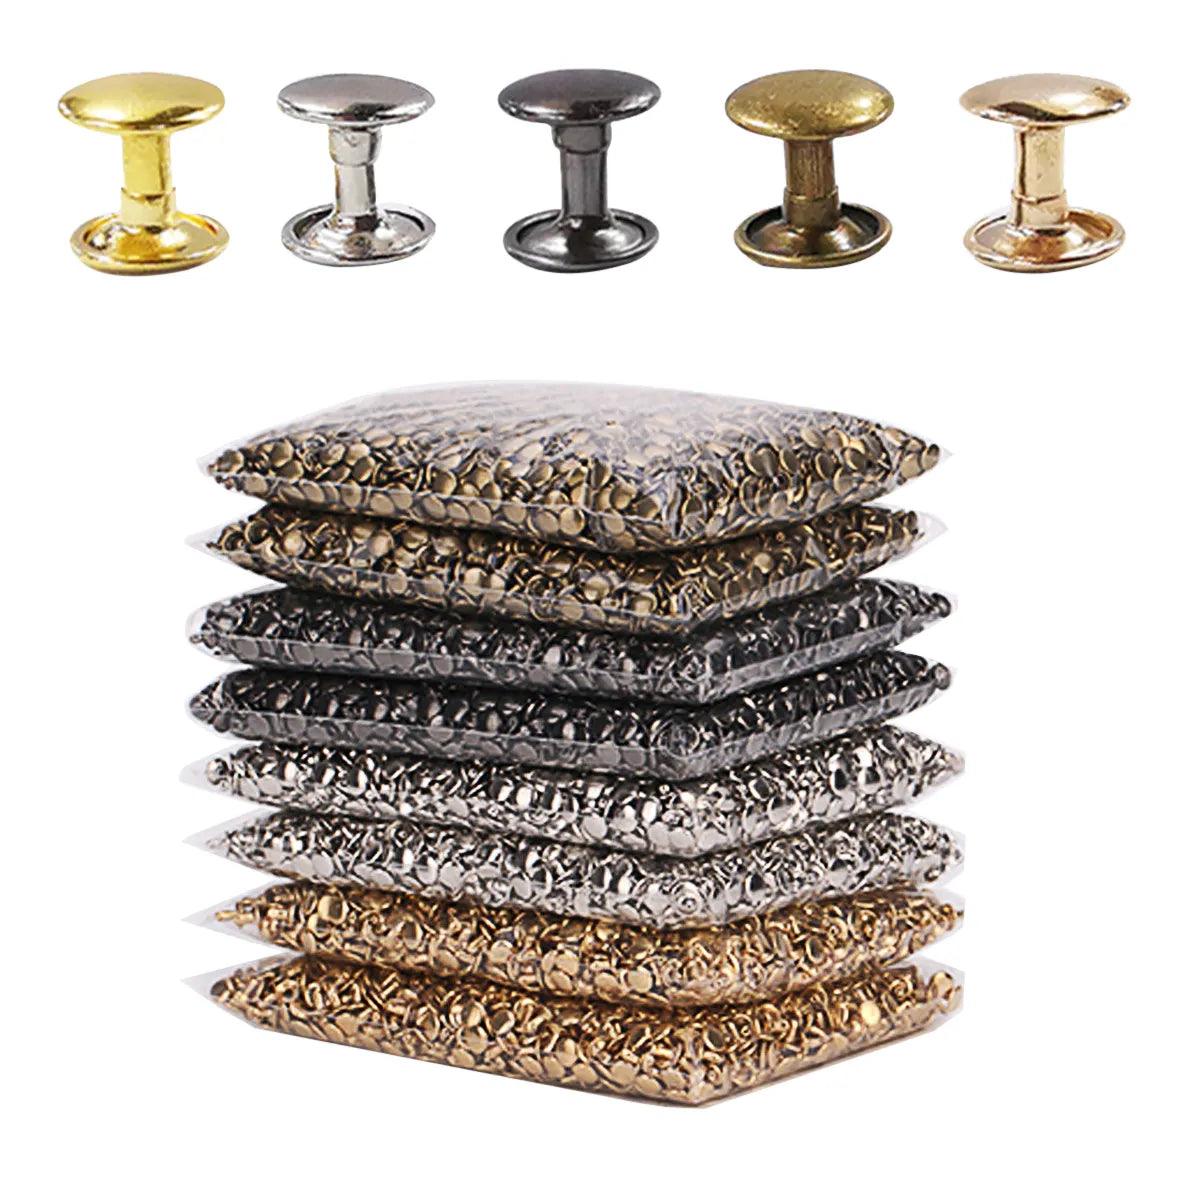 Metal Double Cap Rivets Set with Multiple Sizes and Finishes for Leather Craft and Garment Decoration  ourlum.com   